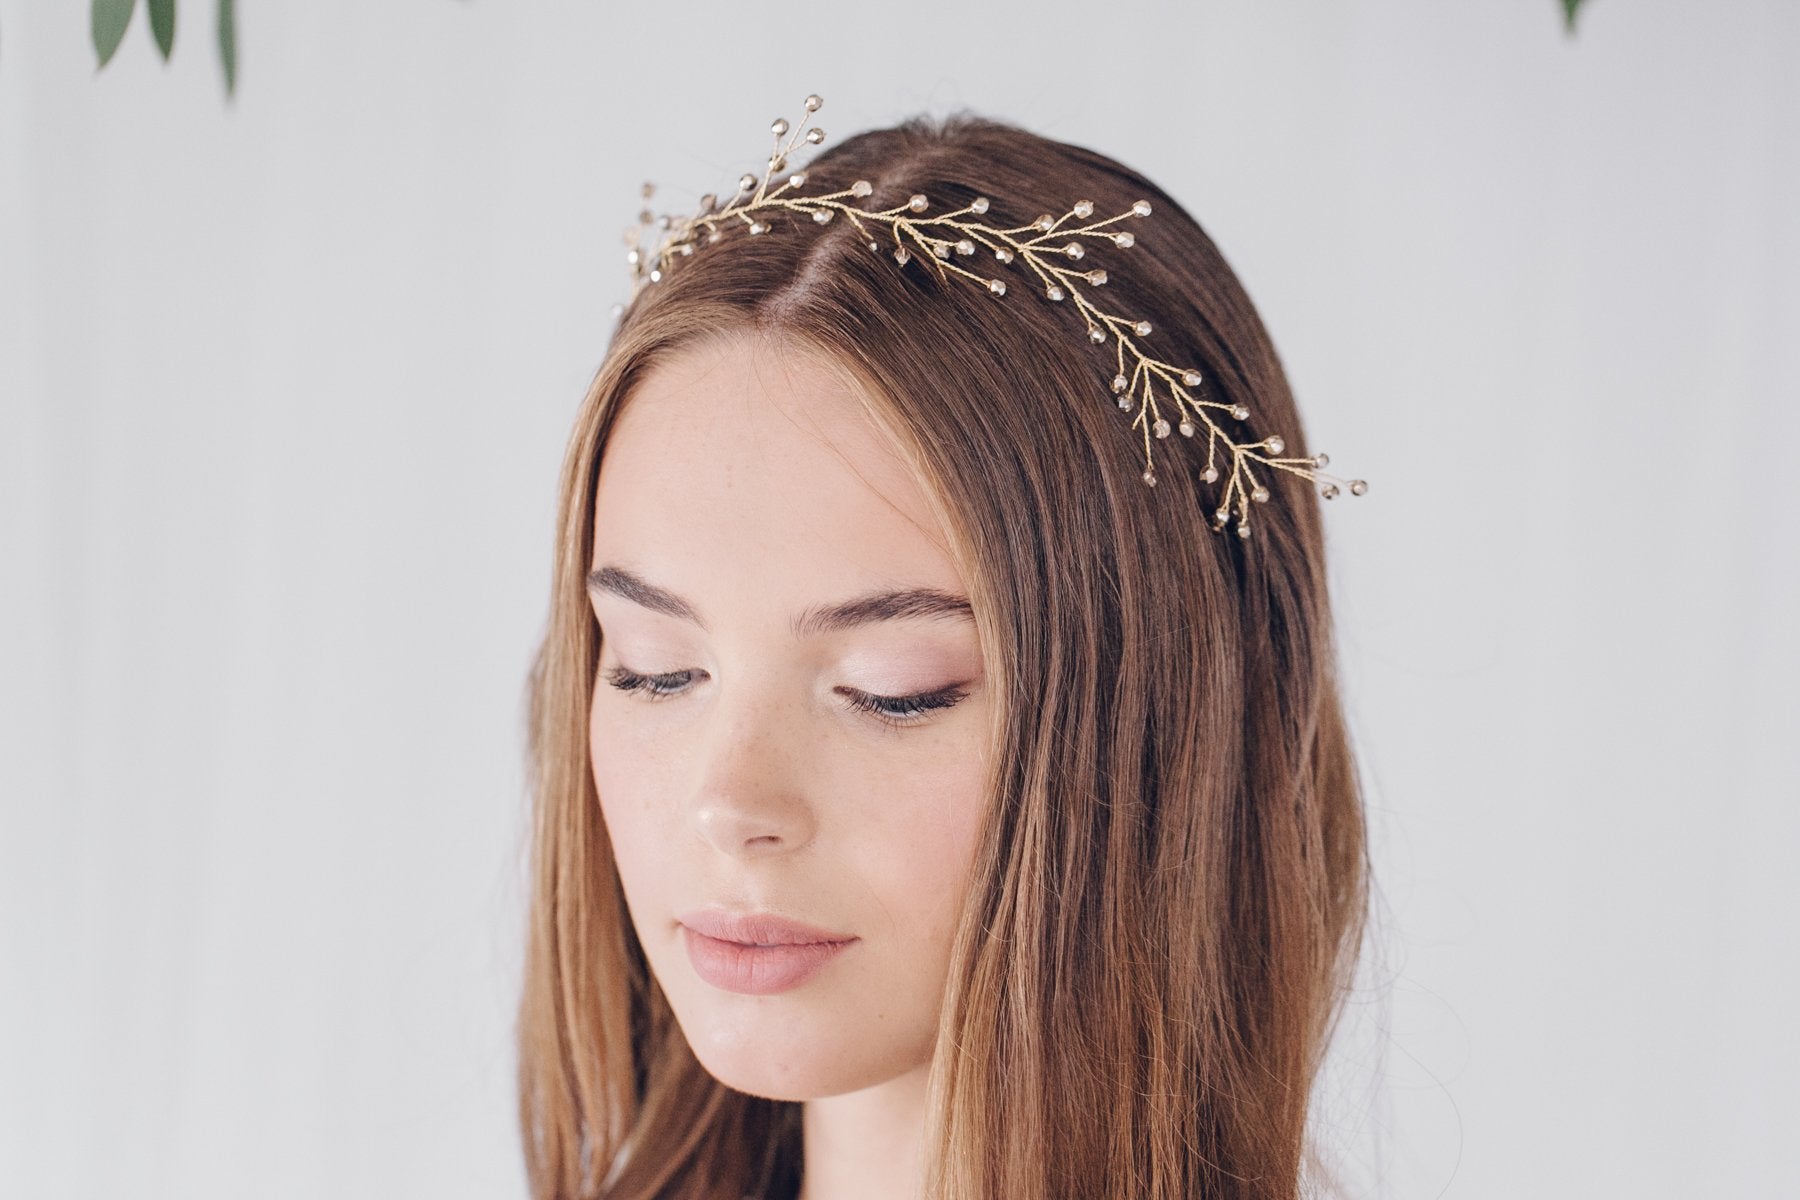 How to style a ribbon tie headband – one of THE most comfortable and versatile wedding hair accessories!